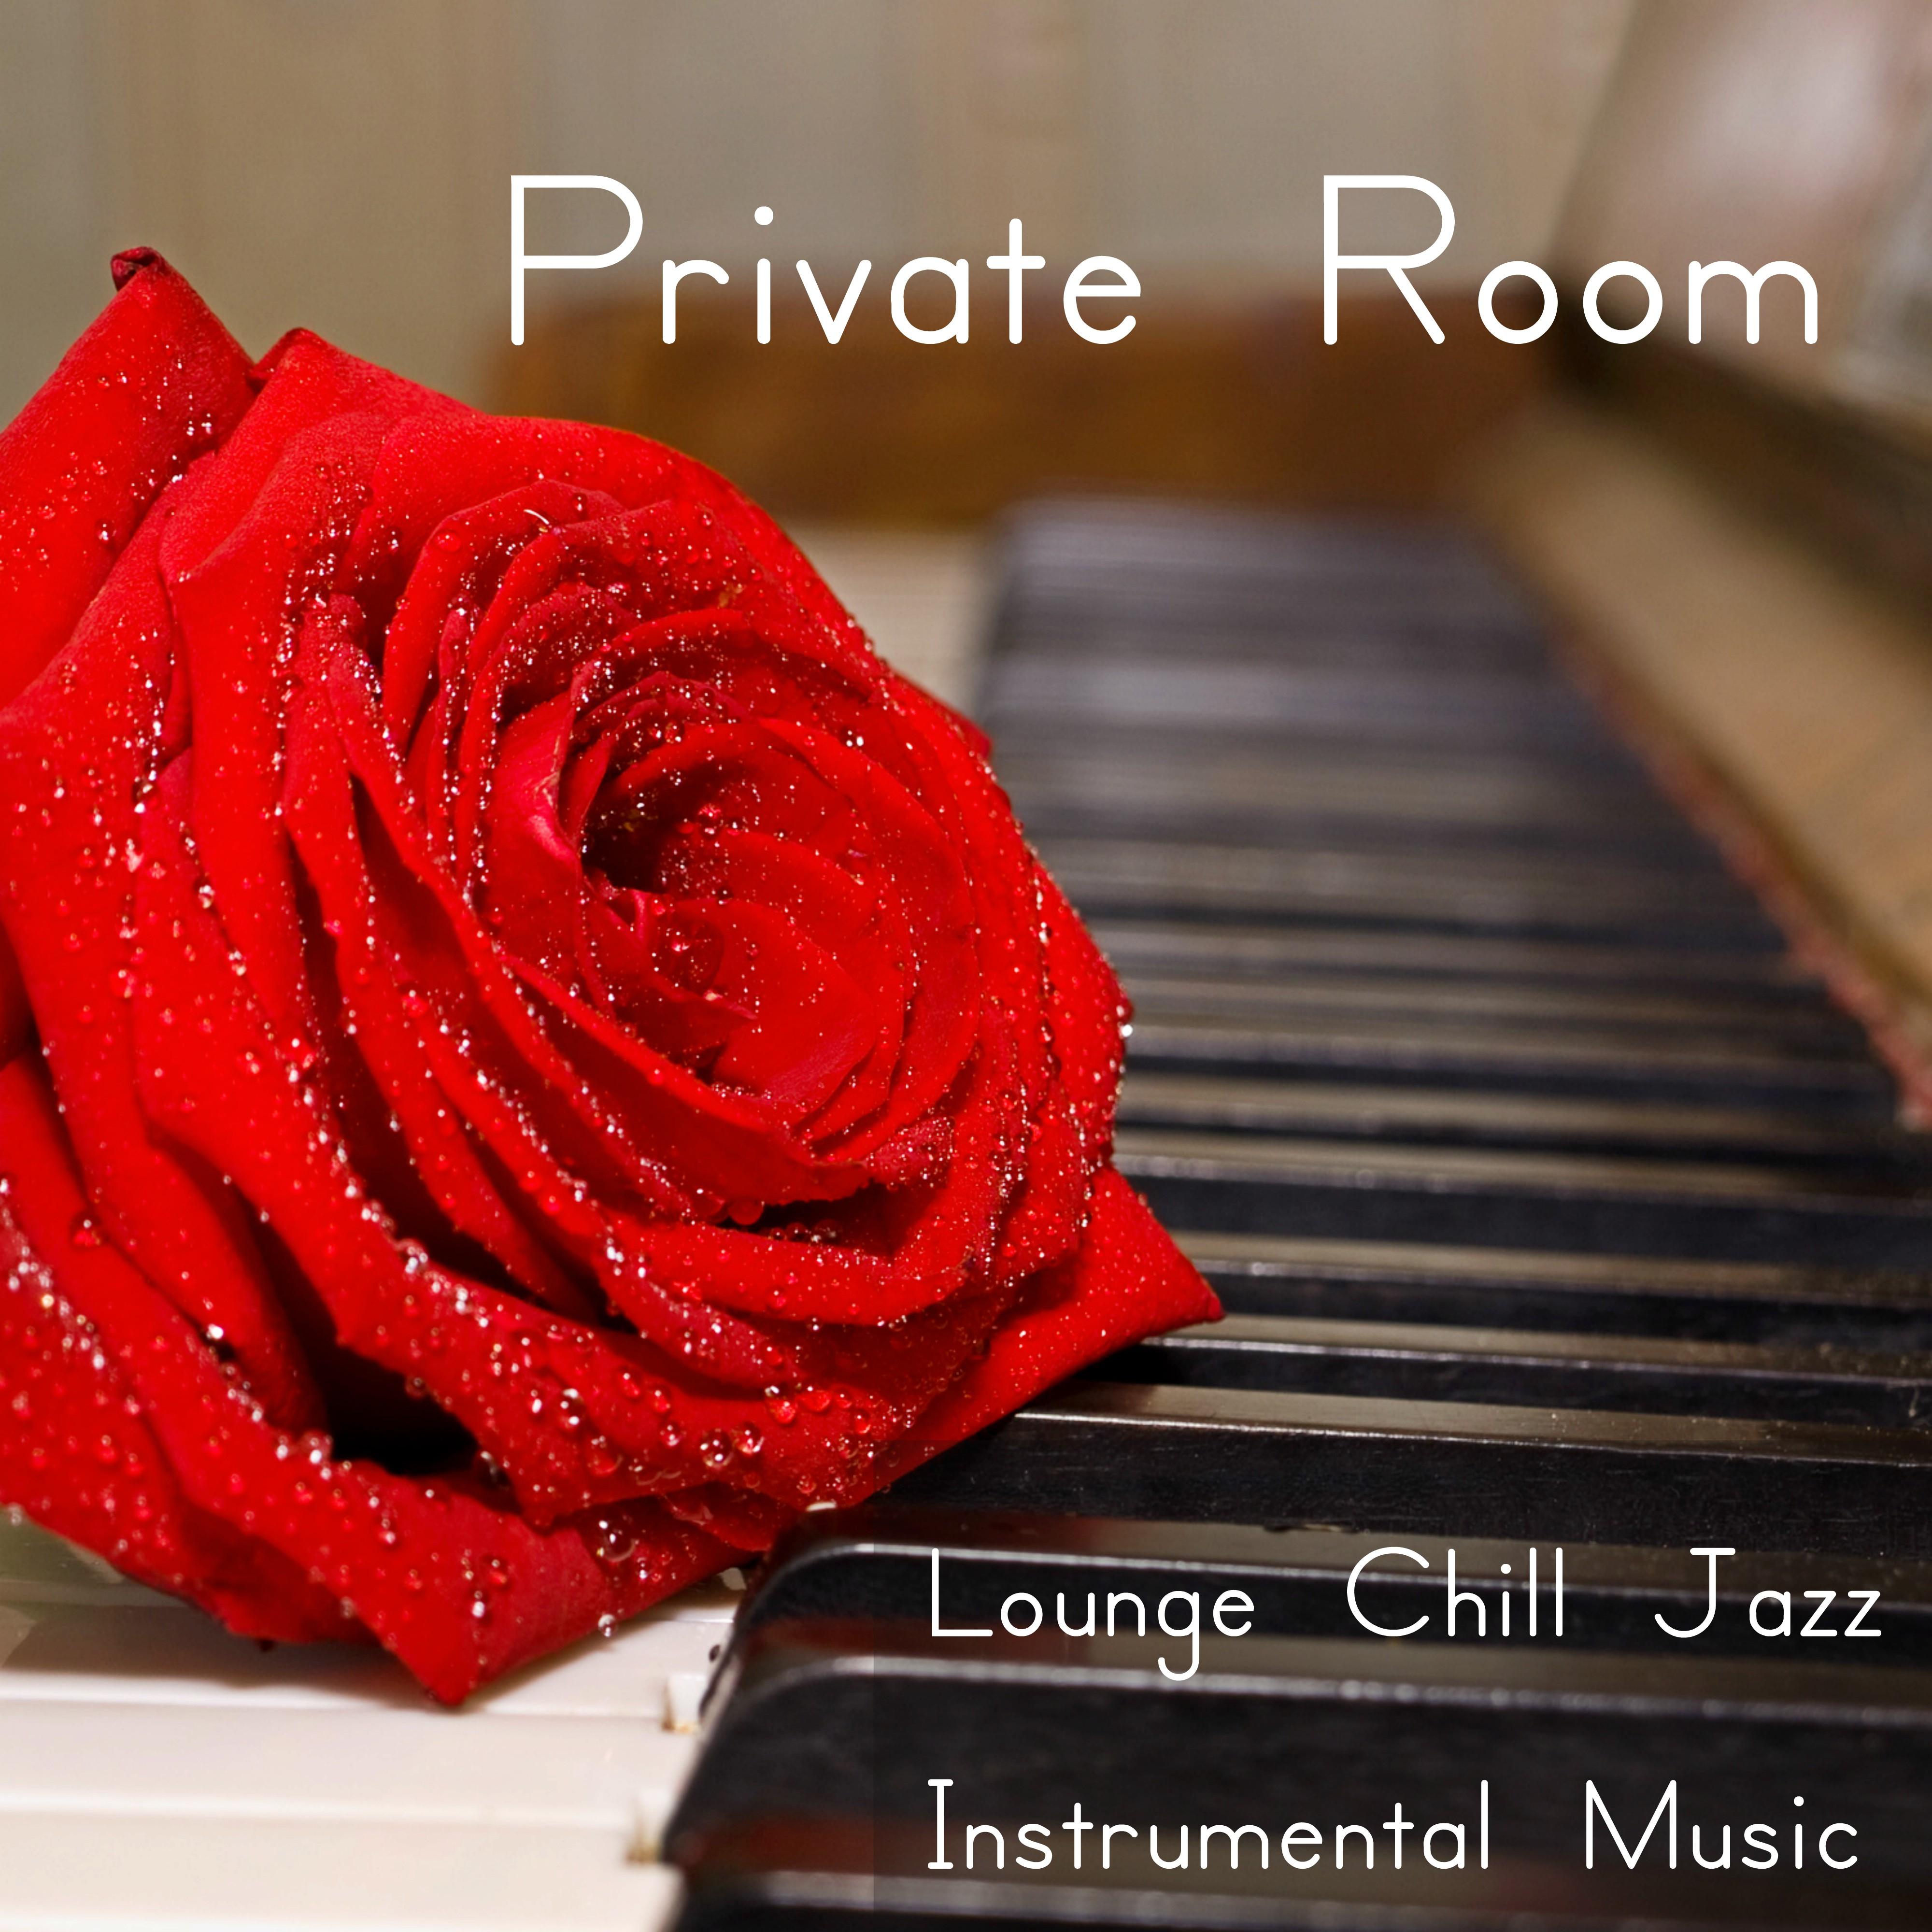 Private Room -  Lounge Chill Jazz Instrumental Music for Deep Relaxation Time and Romantic Love